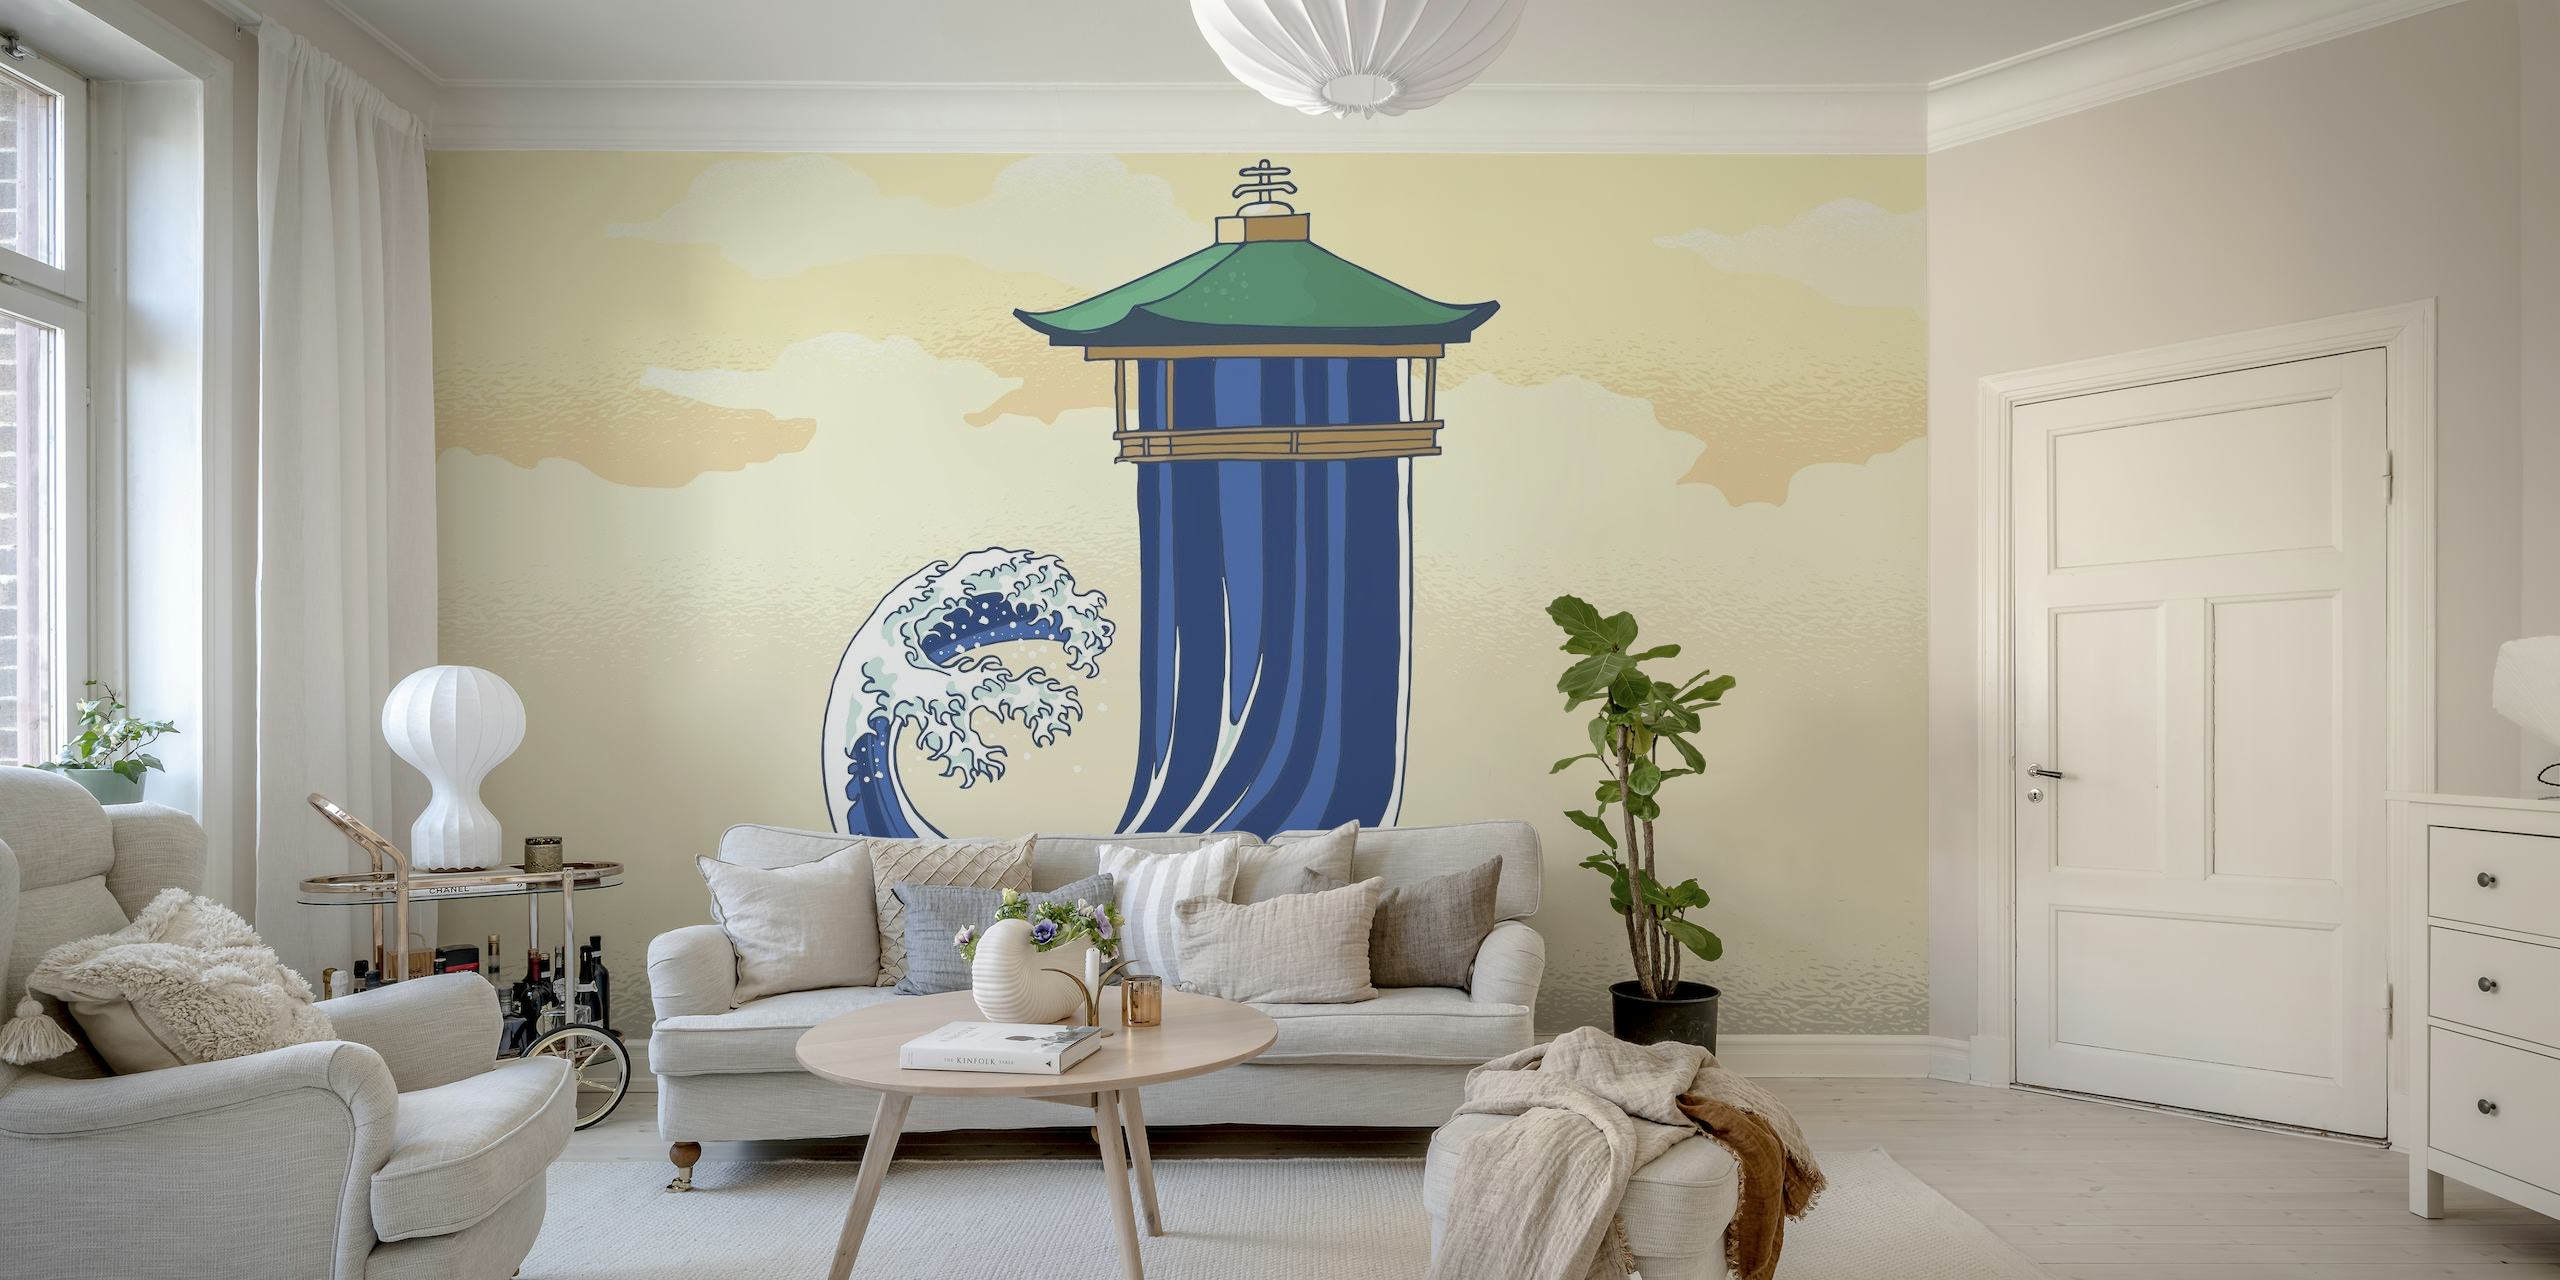 Stylized Japanese pagoda and ocean wave mural in pastel colors